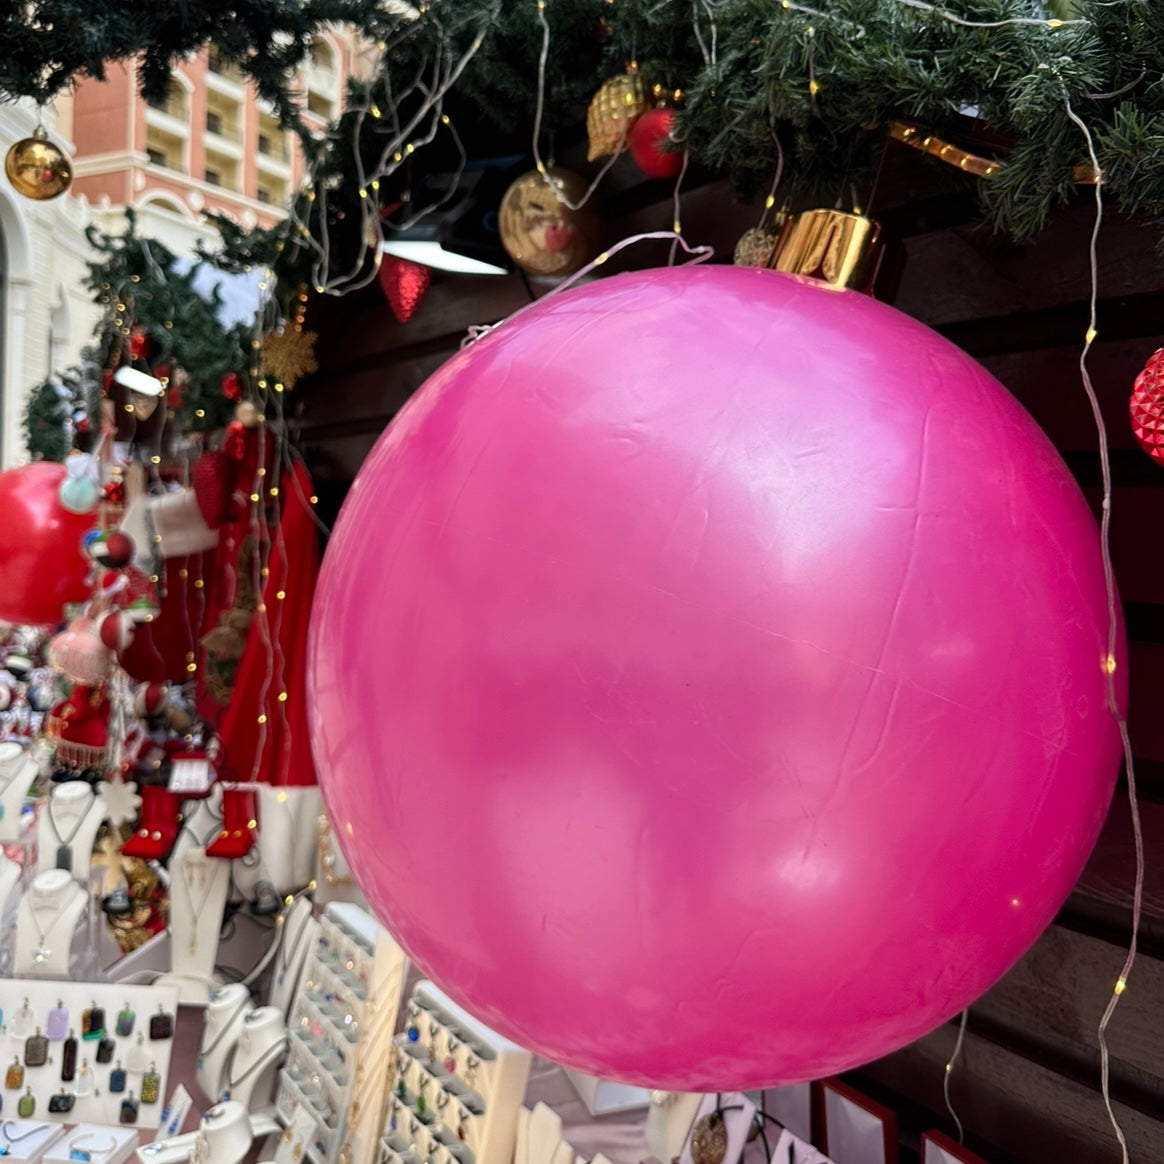 Giant Inflatable Bauble - pink